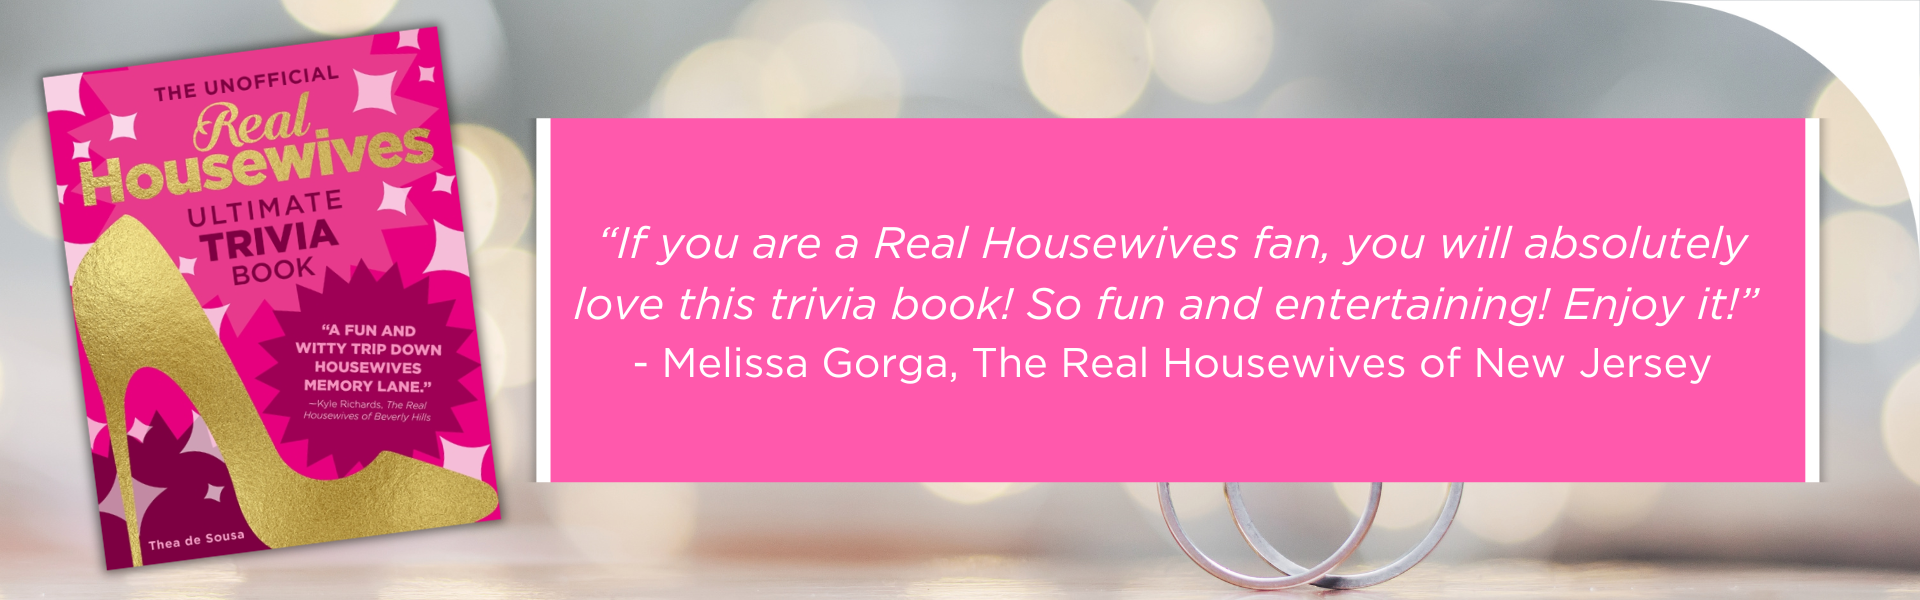 banner for the housewives trivia book.